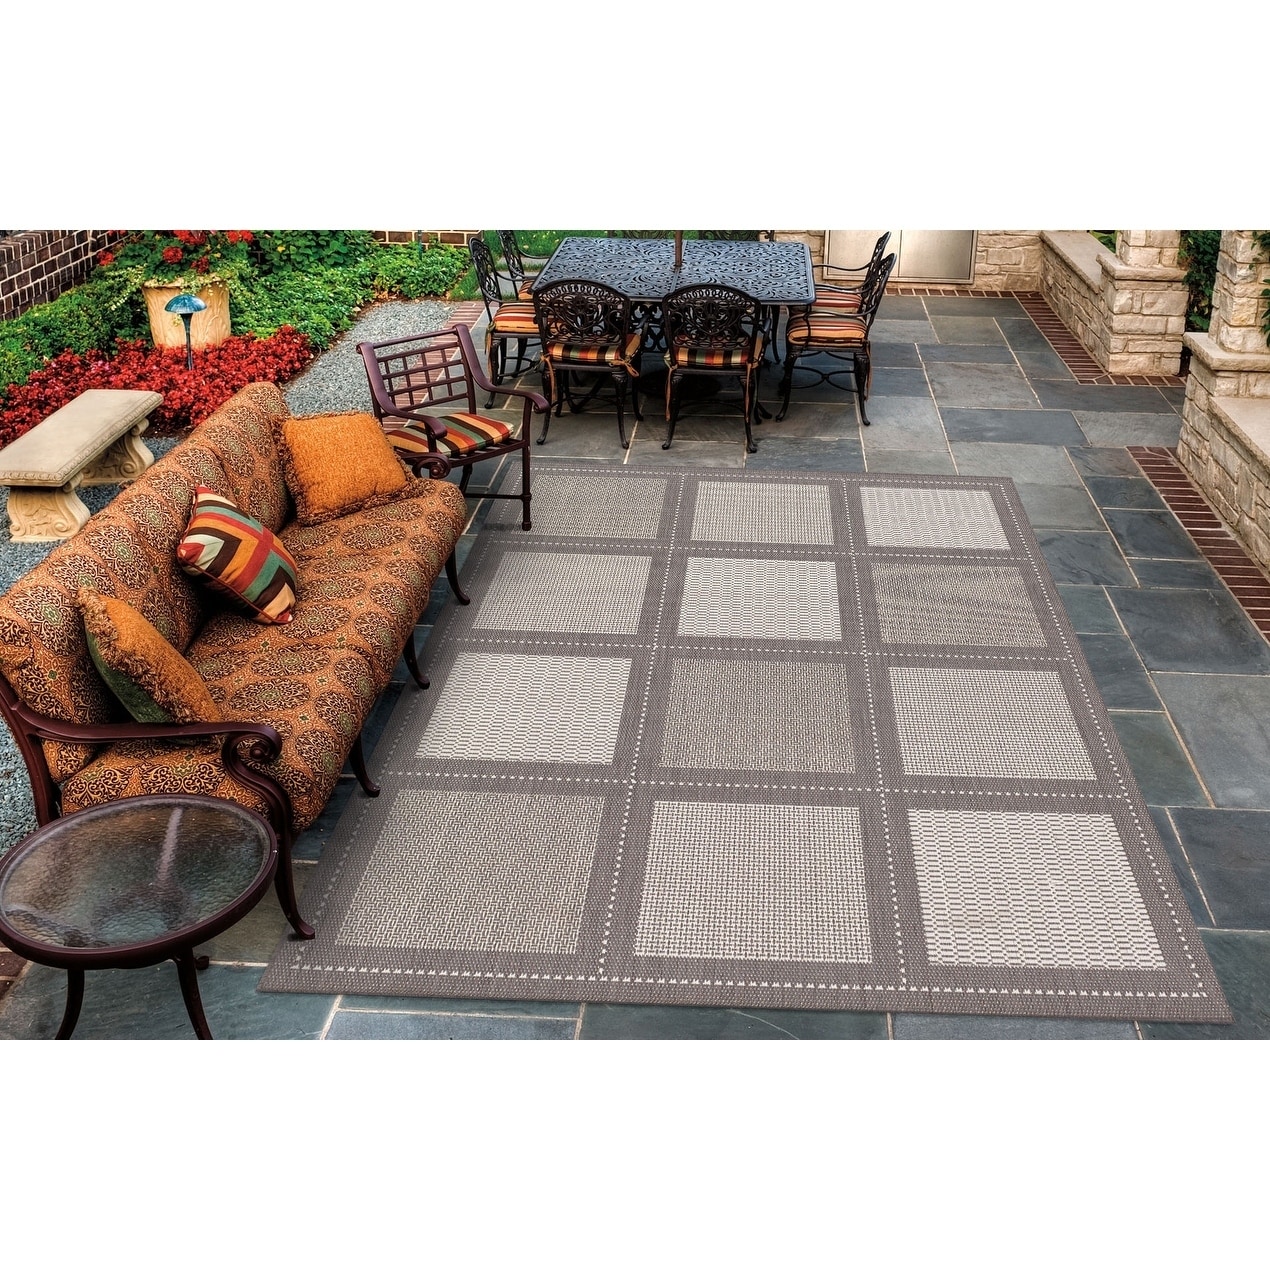 Recife Summit Grey and White Rug (2 x 37) Today $20.99